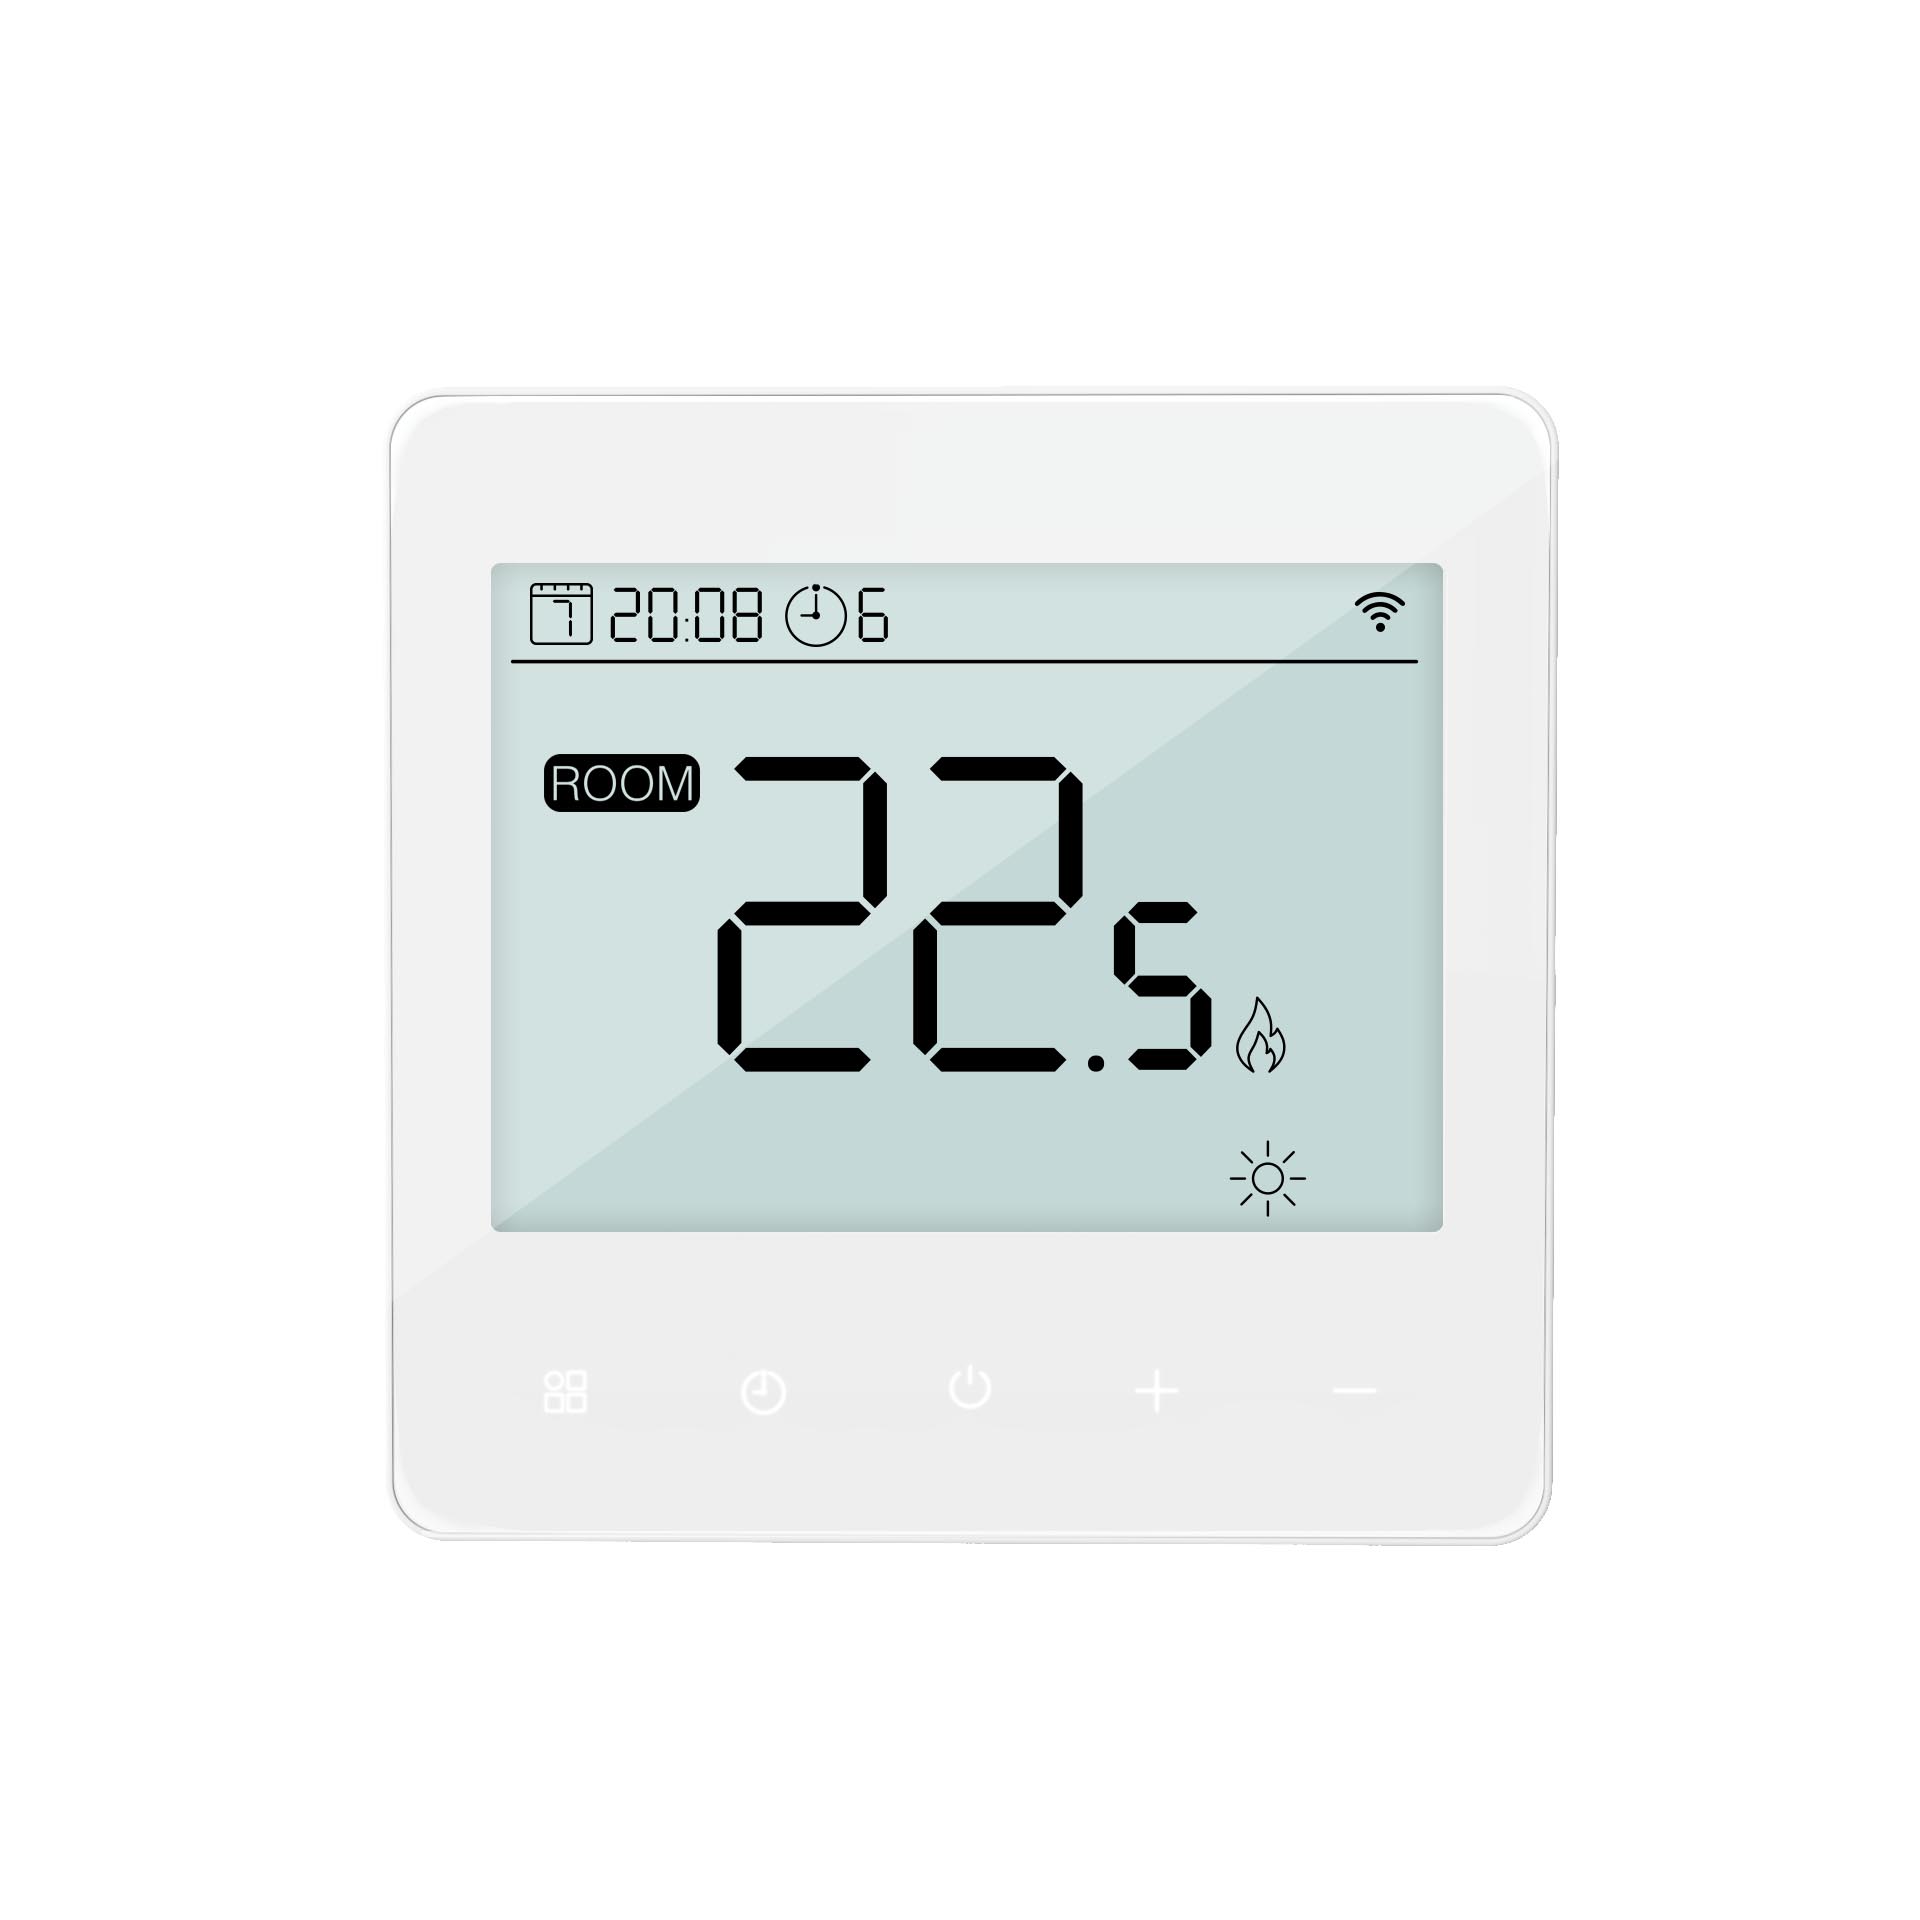 Thermostat for Radiant Floor Heating with 3-Speed Fan Coil Regulation